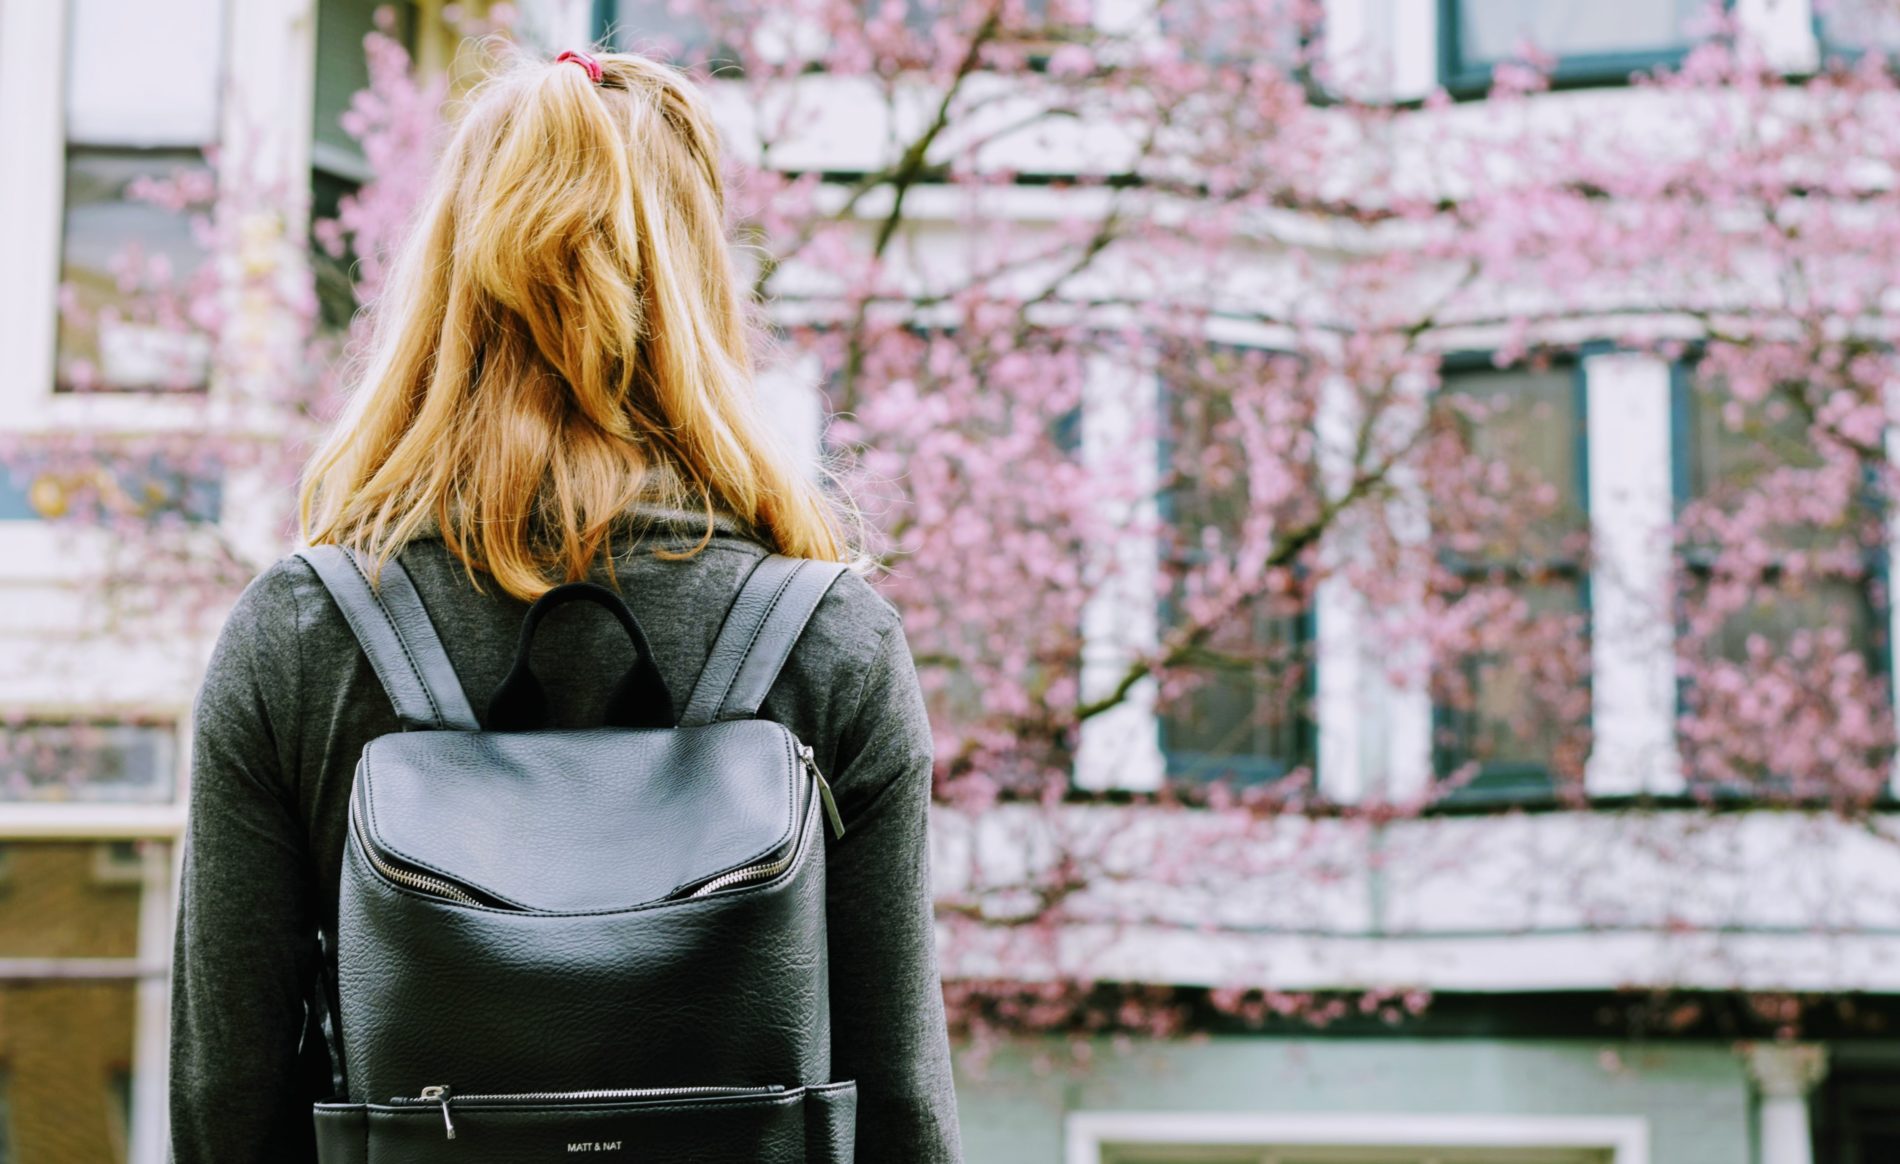 College student wearing a backpack facing a college building